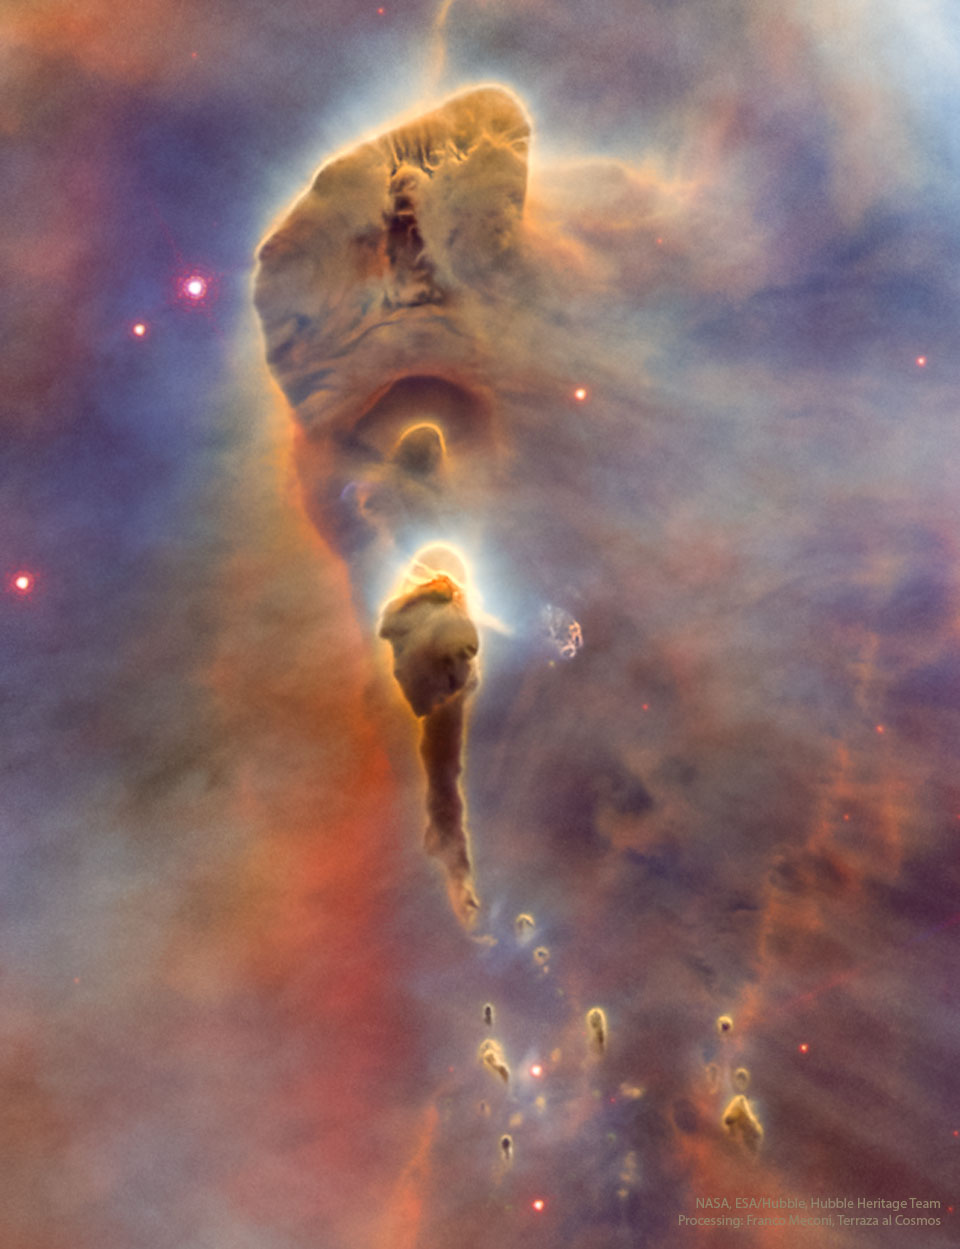 Brown dust pillars in the Carina Nebula are shown. 
Many appear like a torch since their ends are lit up with
starlight.
Please see the explanation for more detailed information.